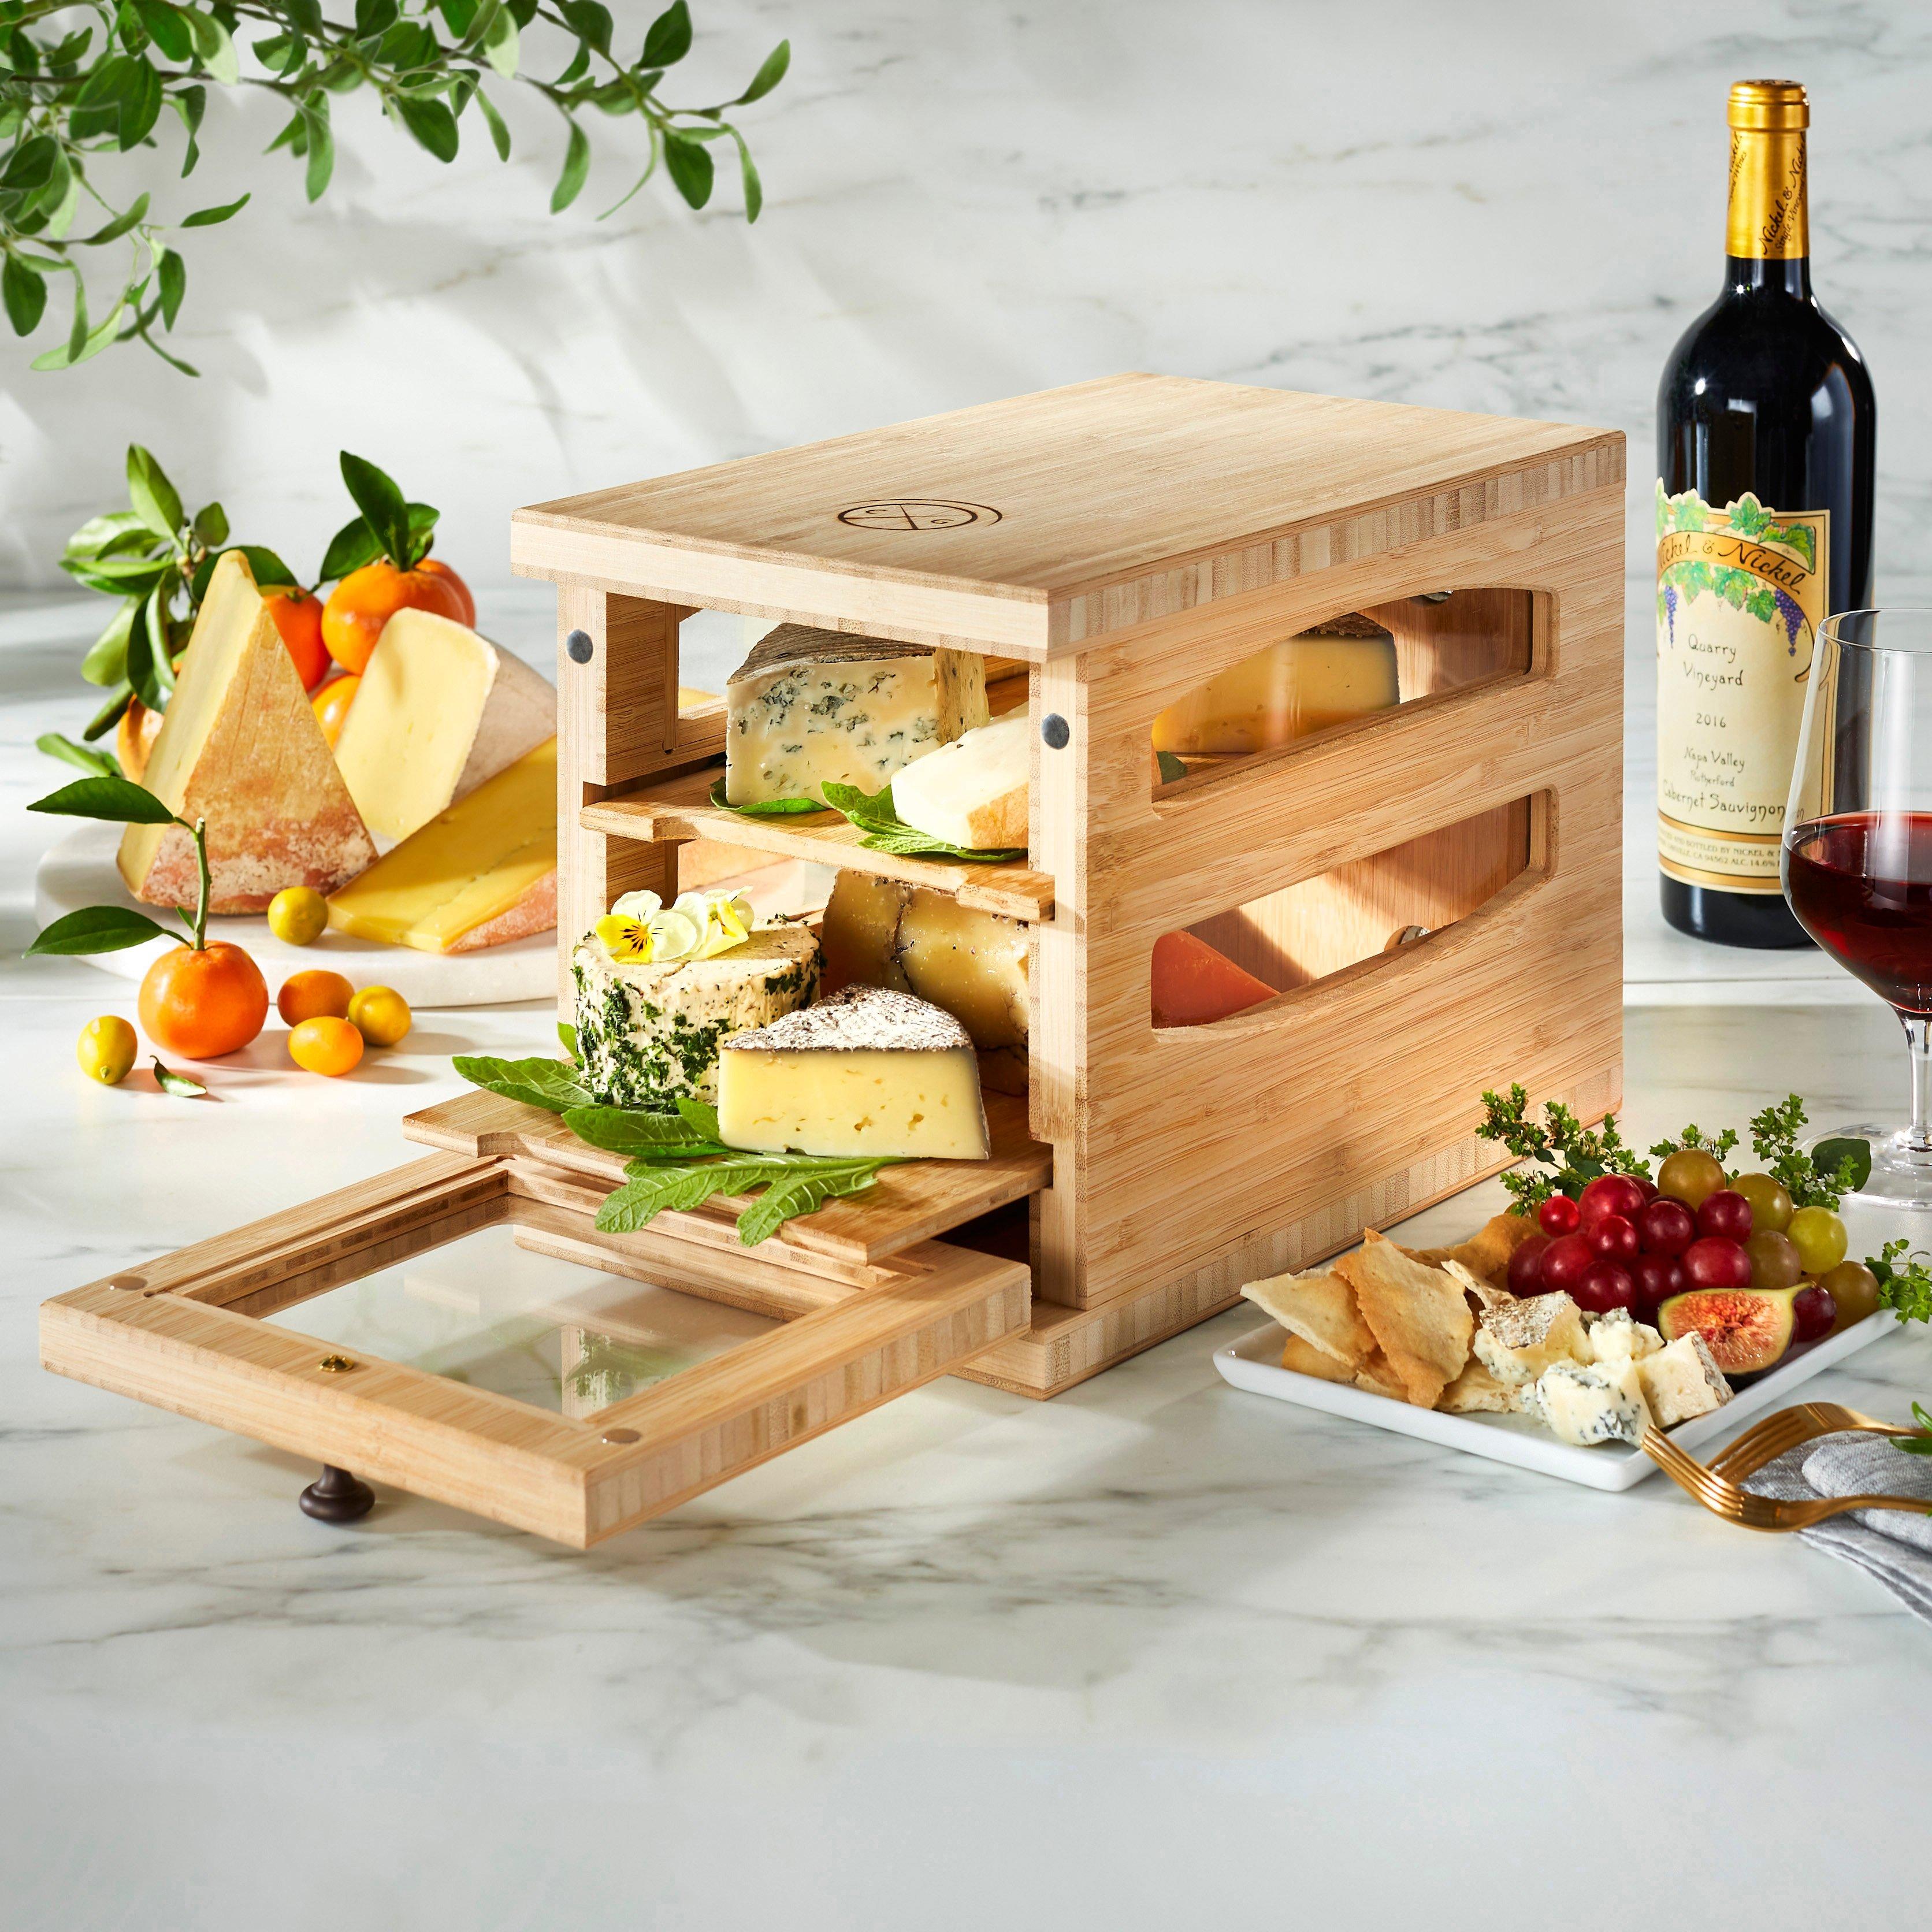 Cheese Grotto Mezzo, Specialty Cheese Wood Storage